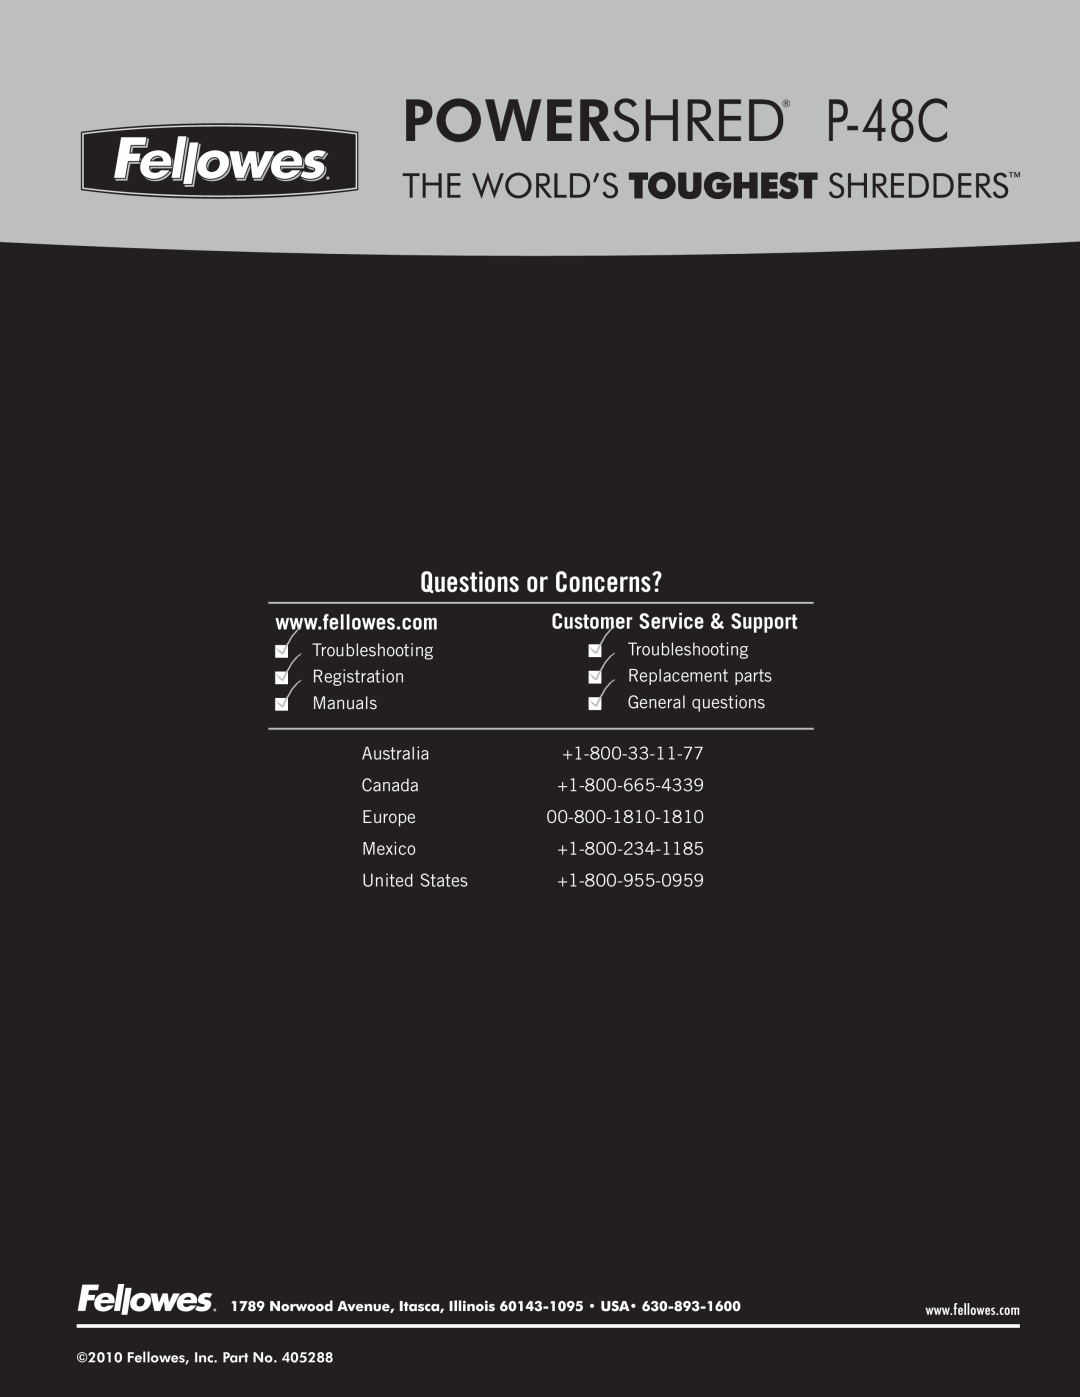 Fellowes manual POWERSHRED P-48C, Questions or Concerns?, Customer Service & Support 